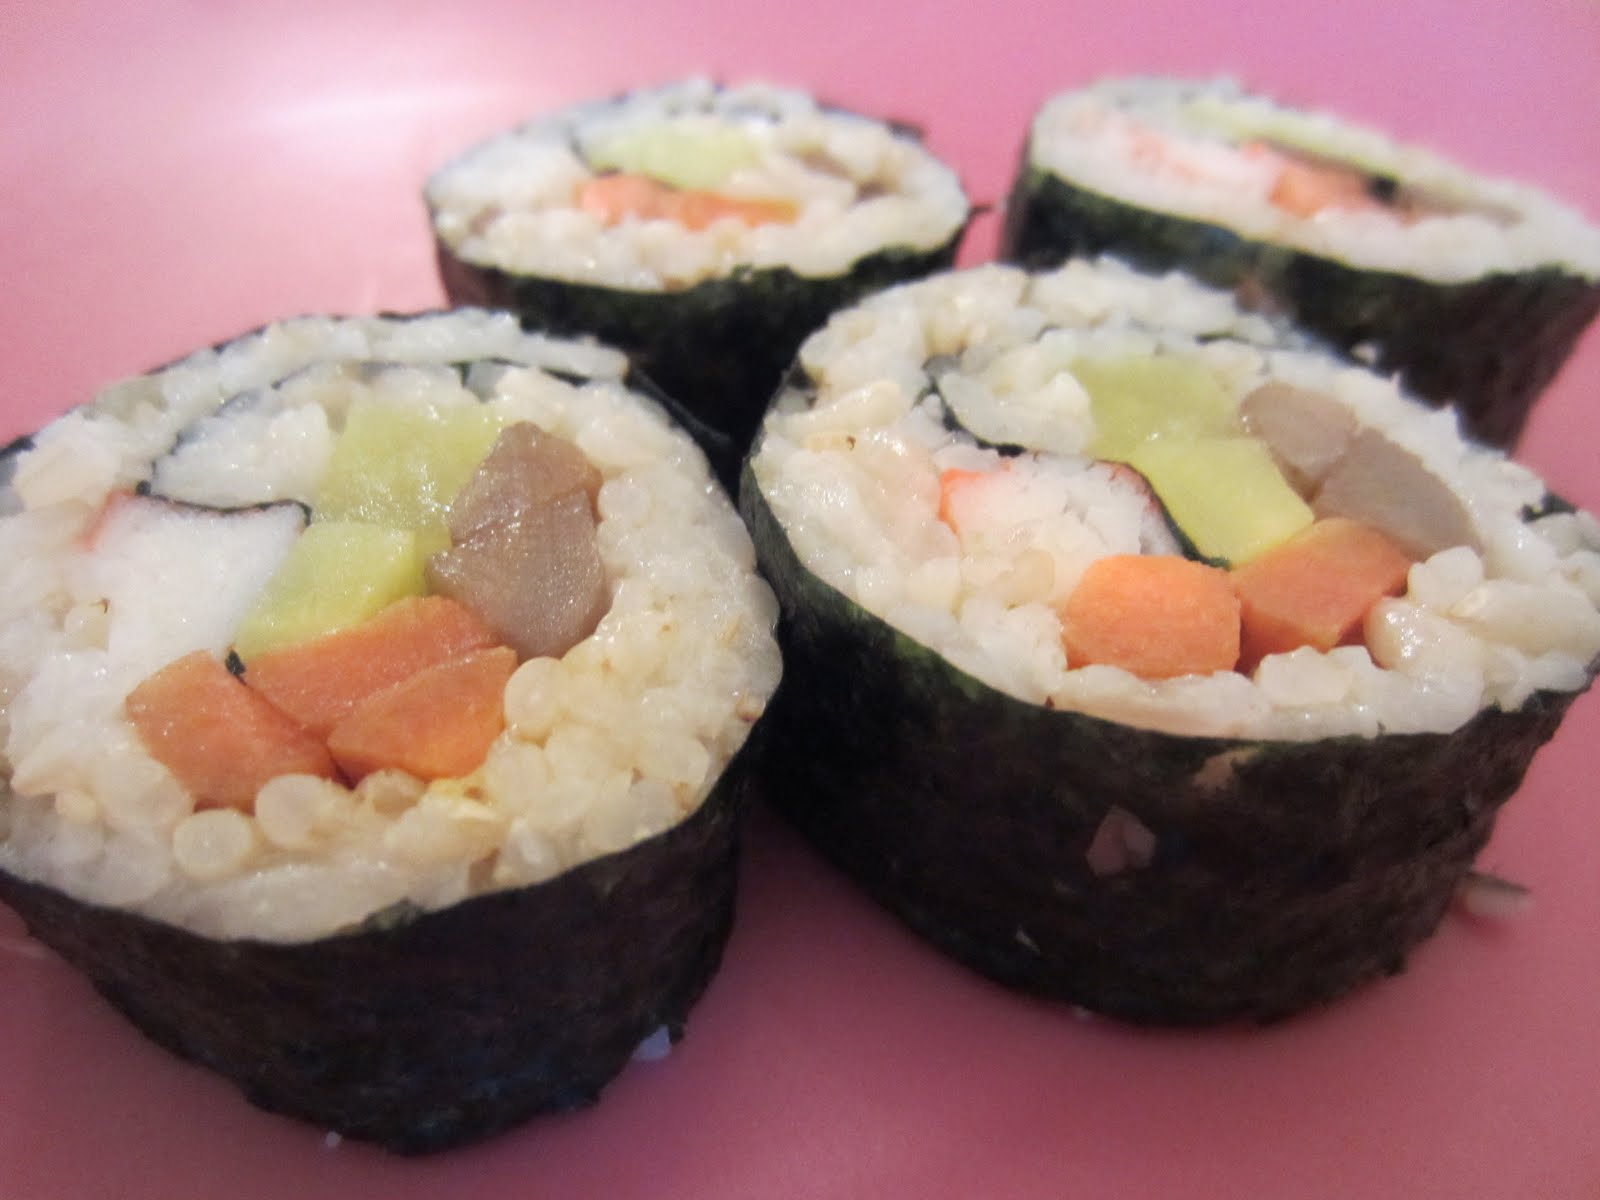 I rolled and made my first Gimbap last night! I didn't use a sushi